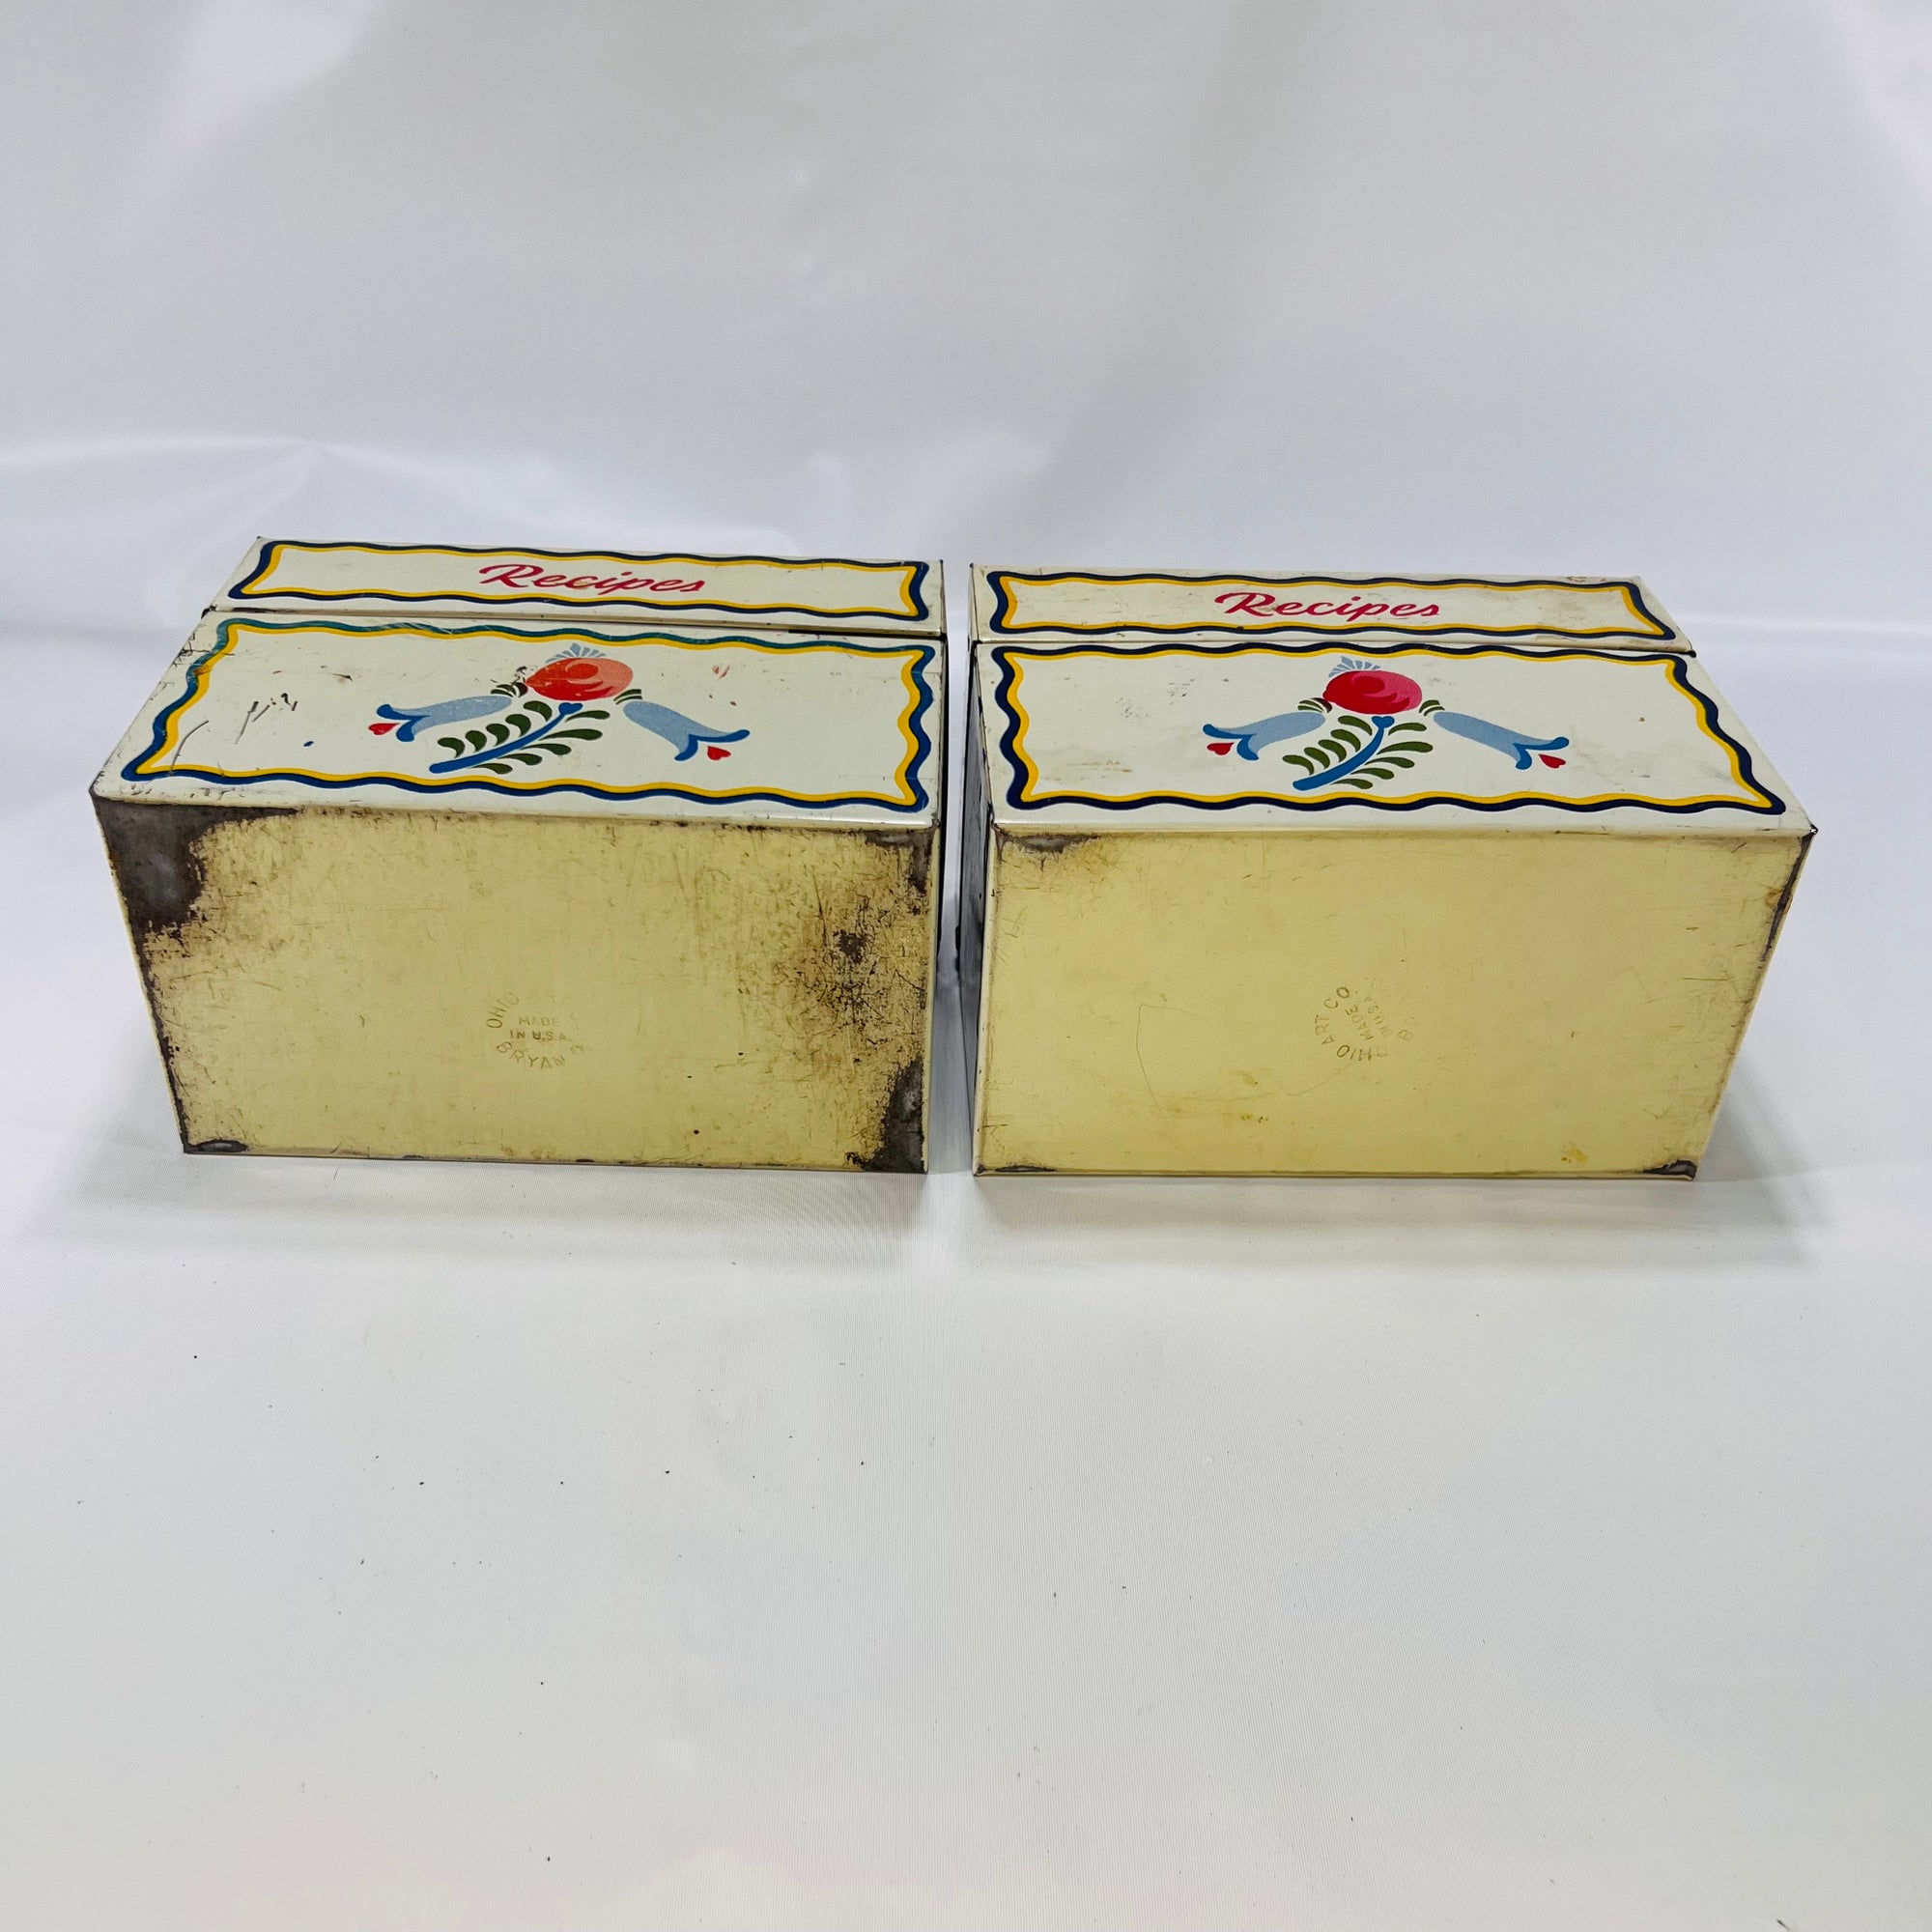 Pair of Vintage Floral Metal Ohio Art Recipe Boxes Crammed Full of Recipe Cards Estate Sale Find